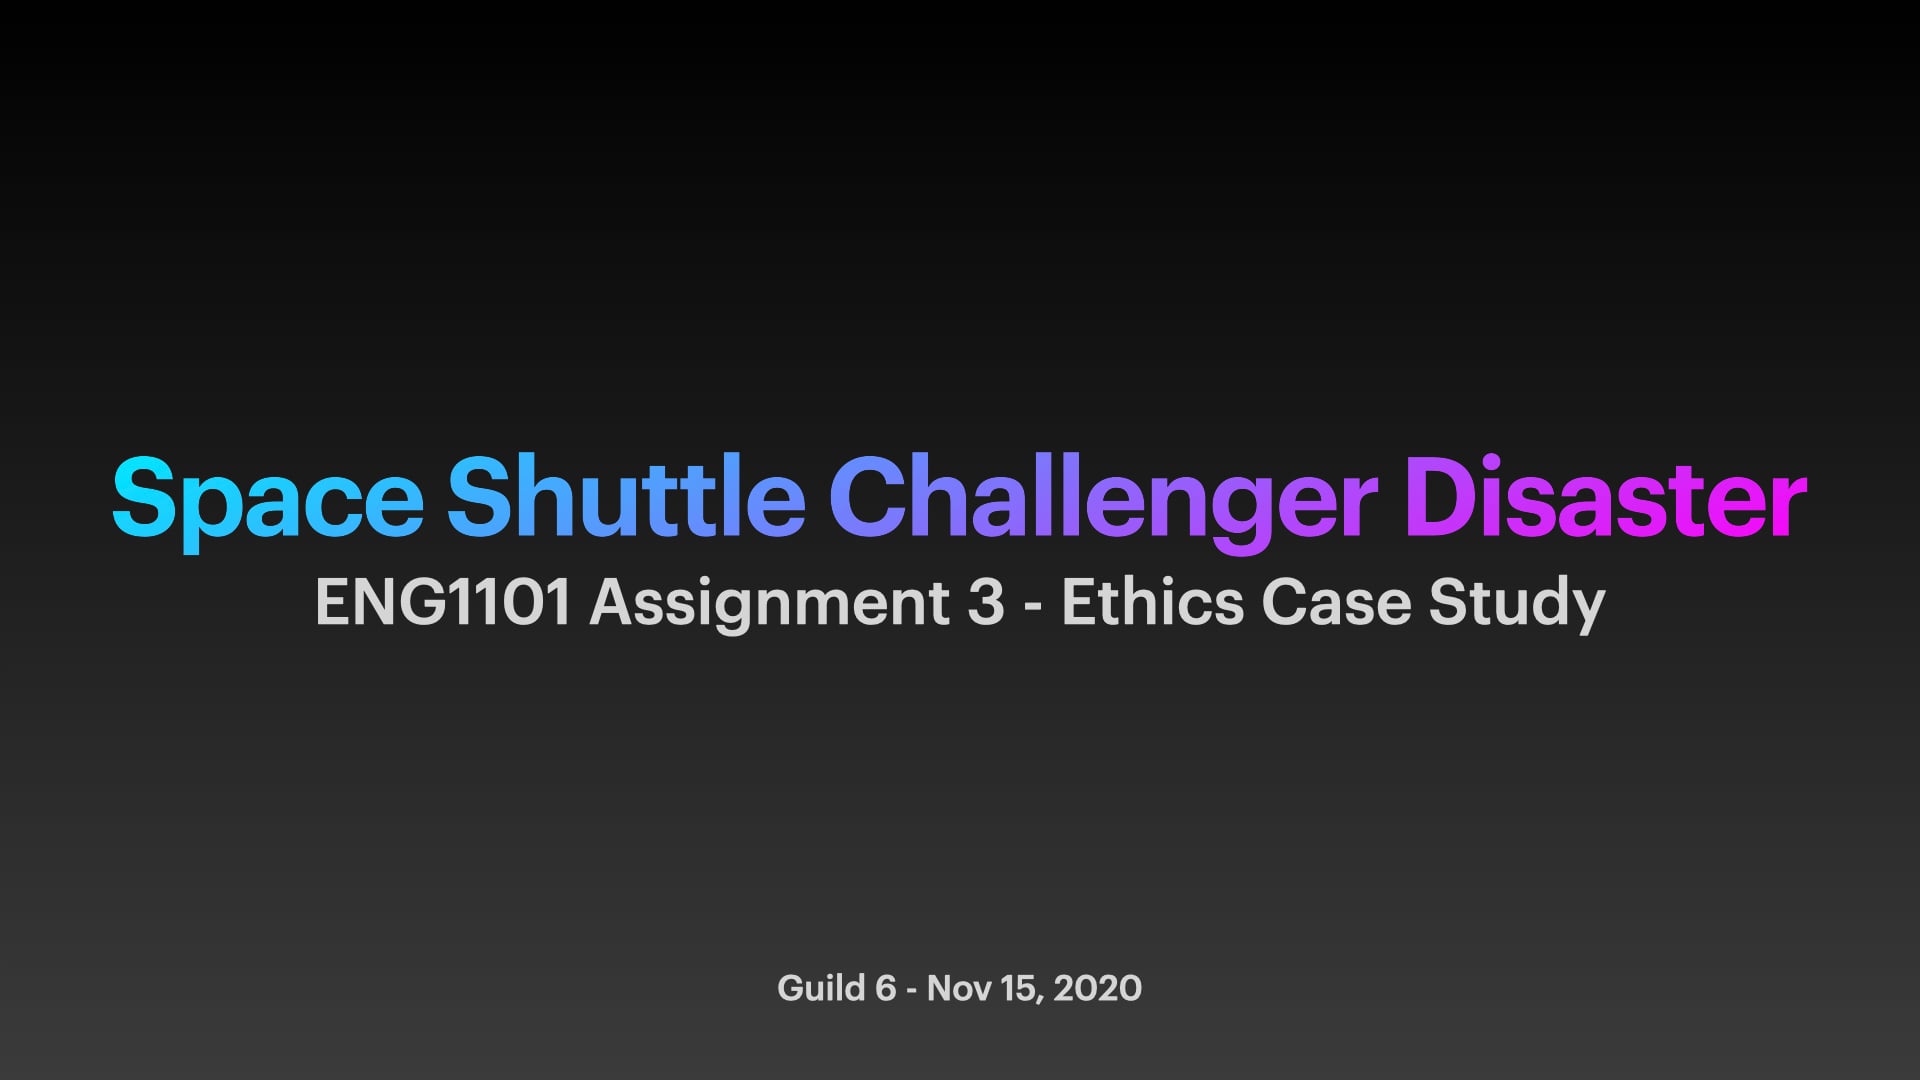 space shuttle challenger disaster ethics case study